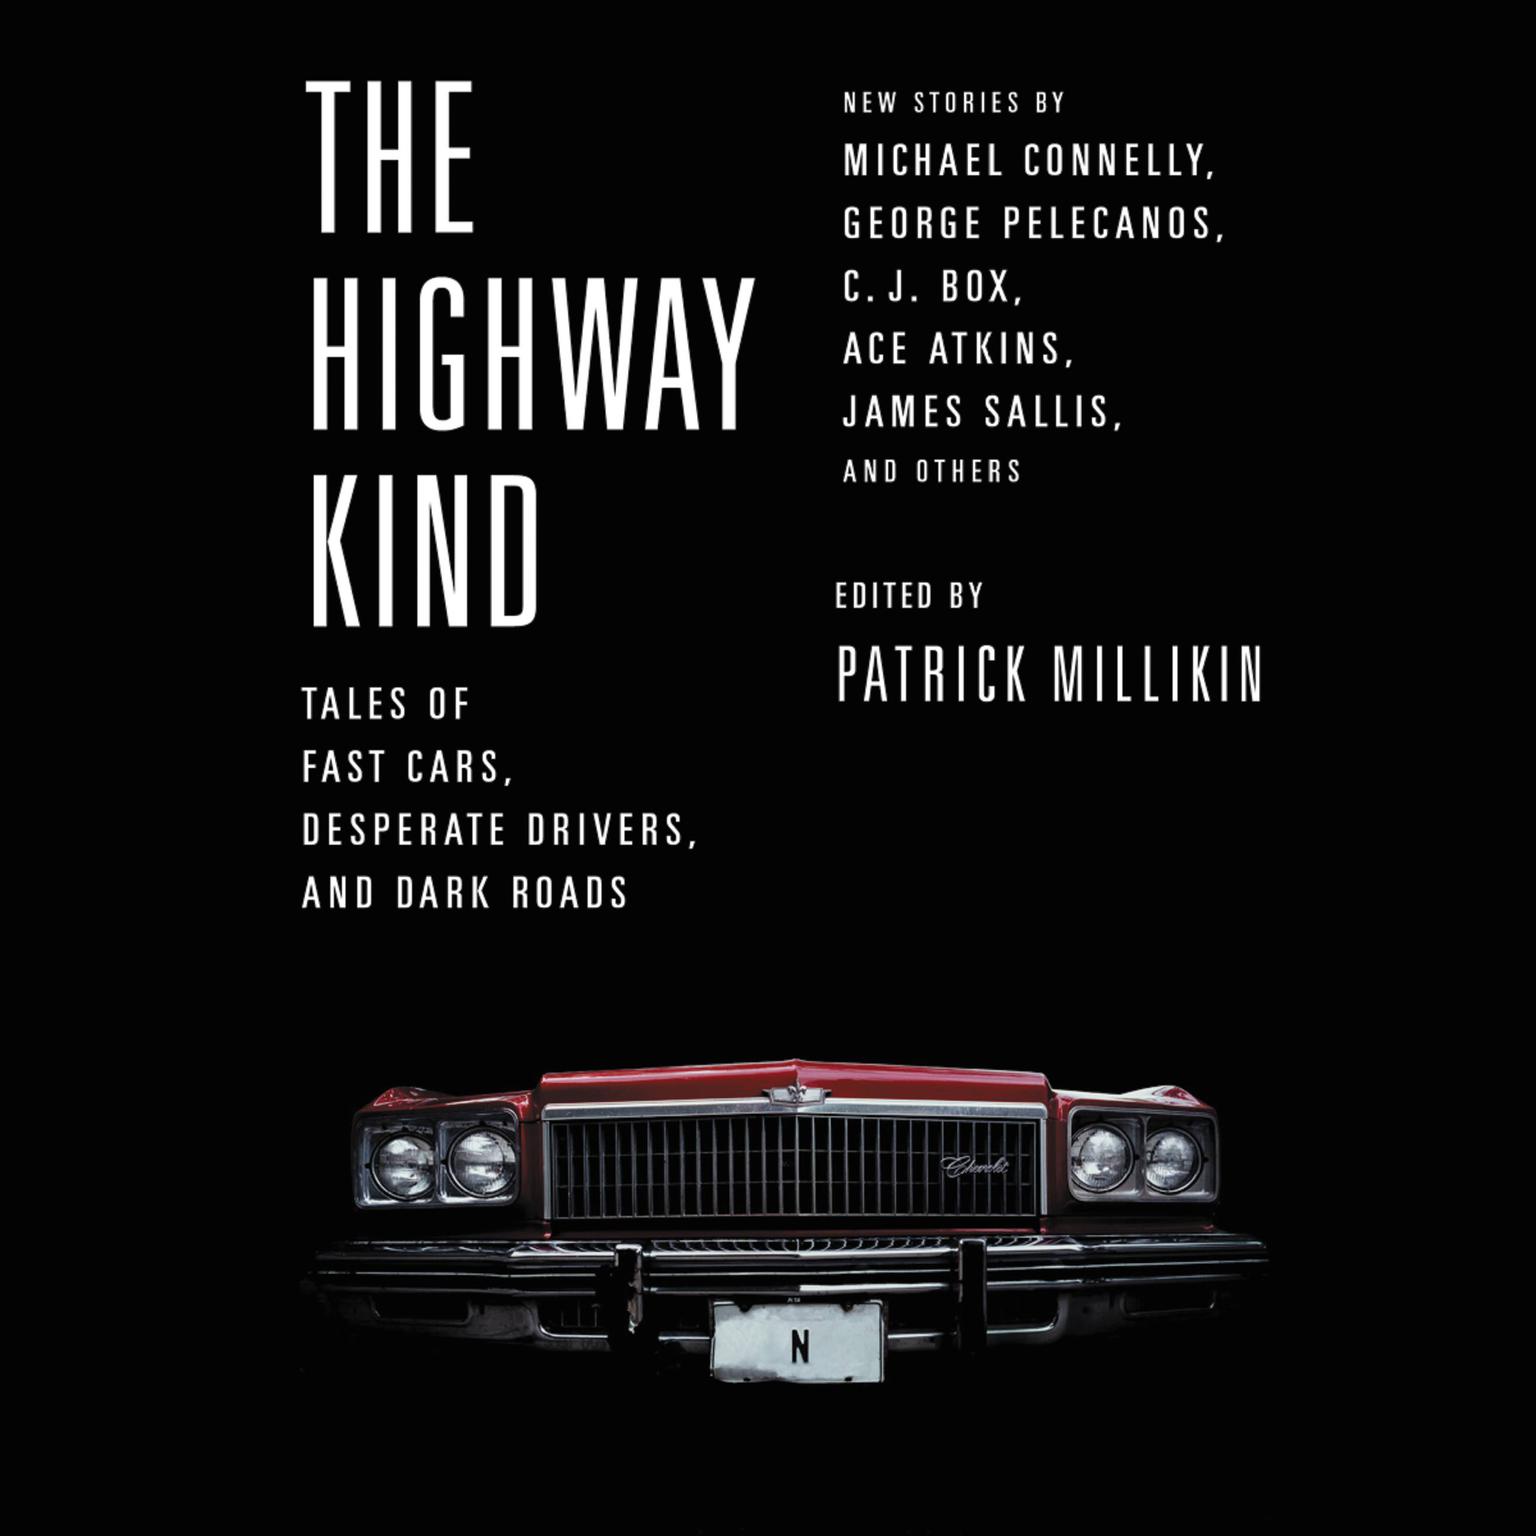 The Highway Kind: Tales of Fast Cars, Desperate Drivers, and Dark Roads: Original Stories by Michael Connelly, George Pelecanos, C. J.  Box, Diana Gabaldon, Ace Atkins & Others Audiobook, by Patrick Millikin